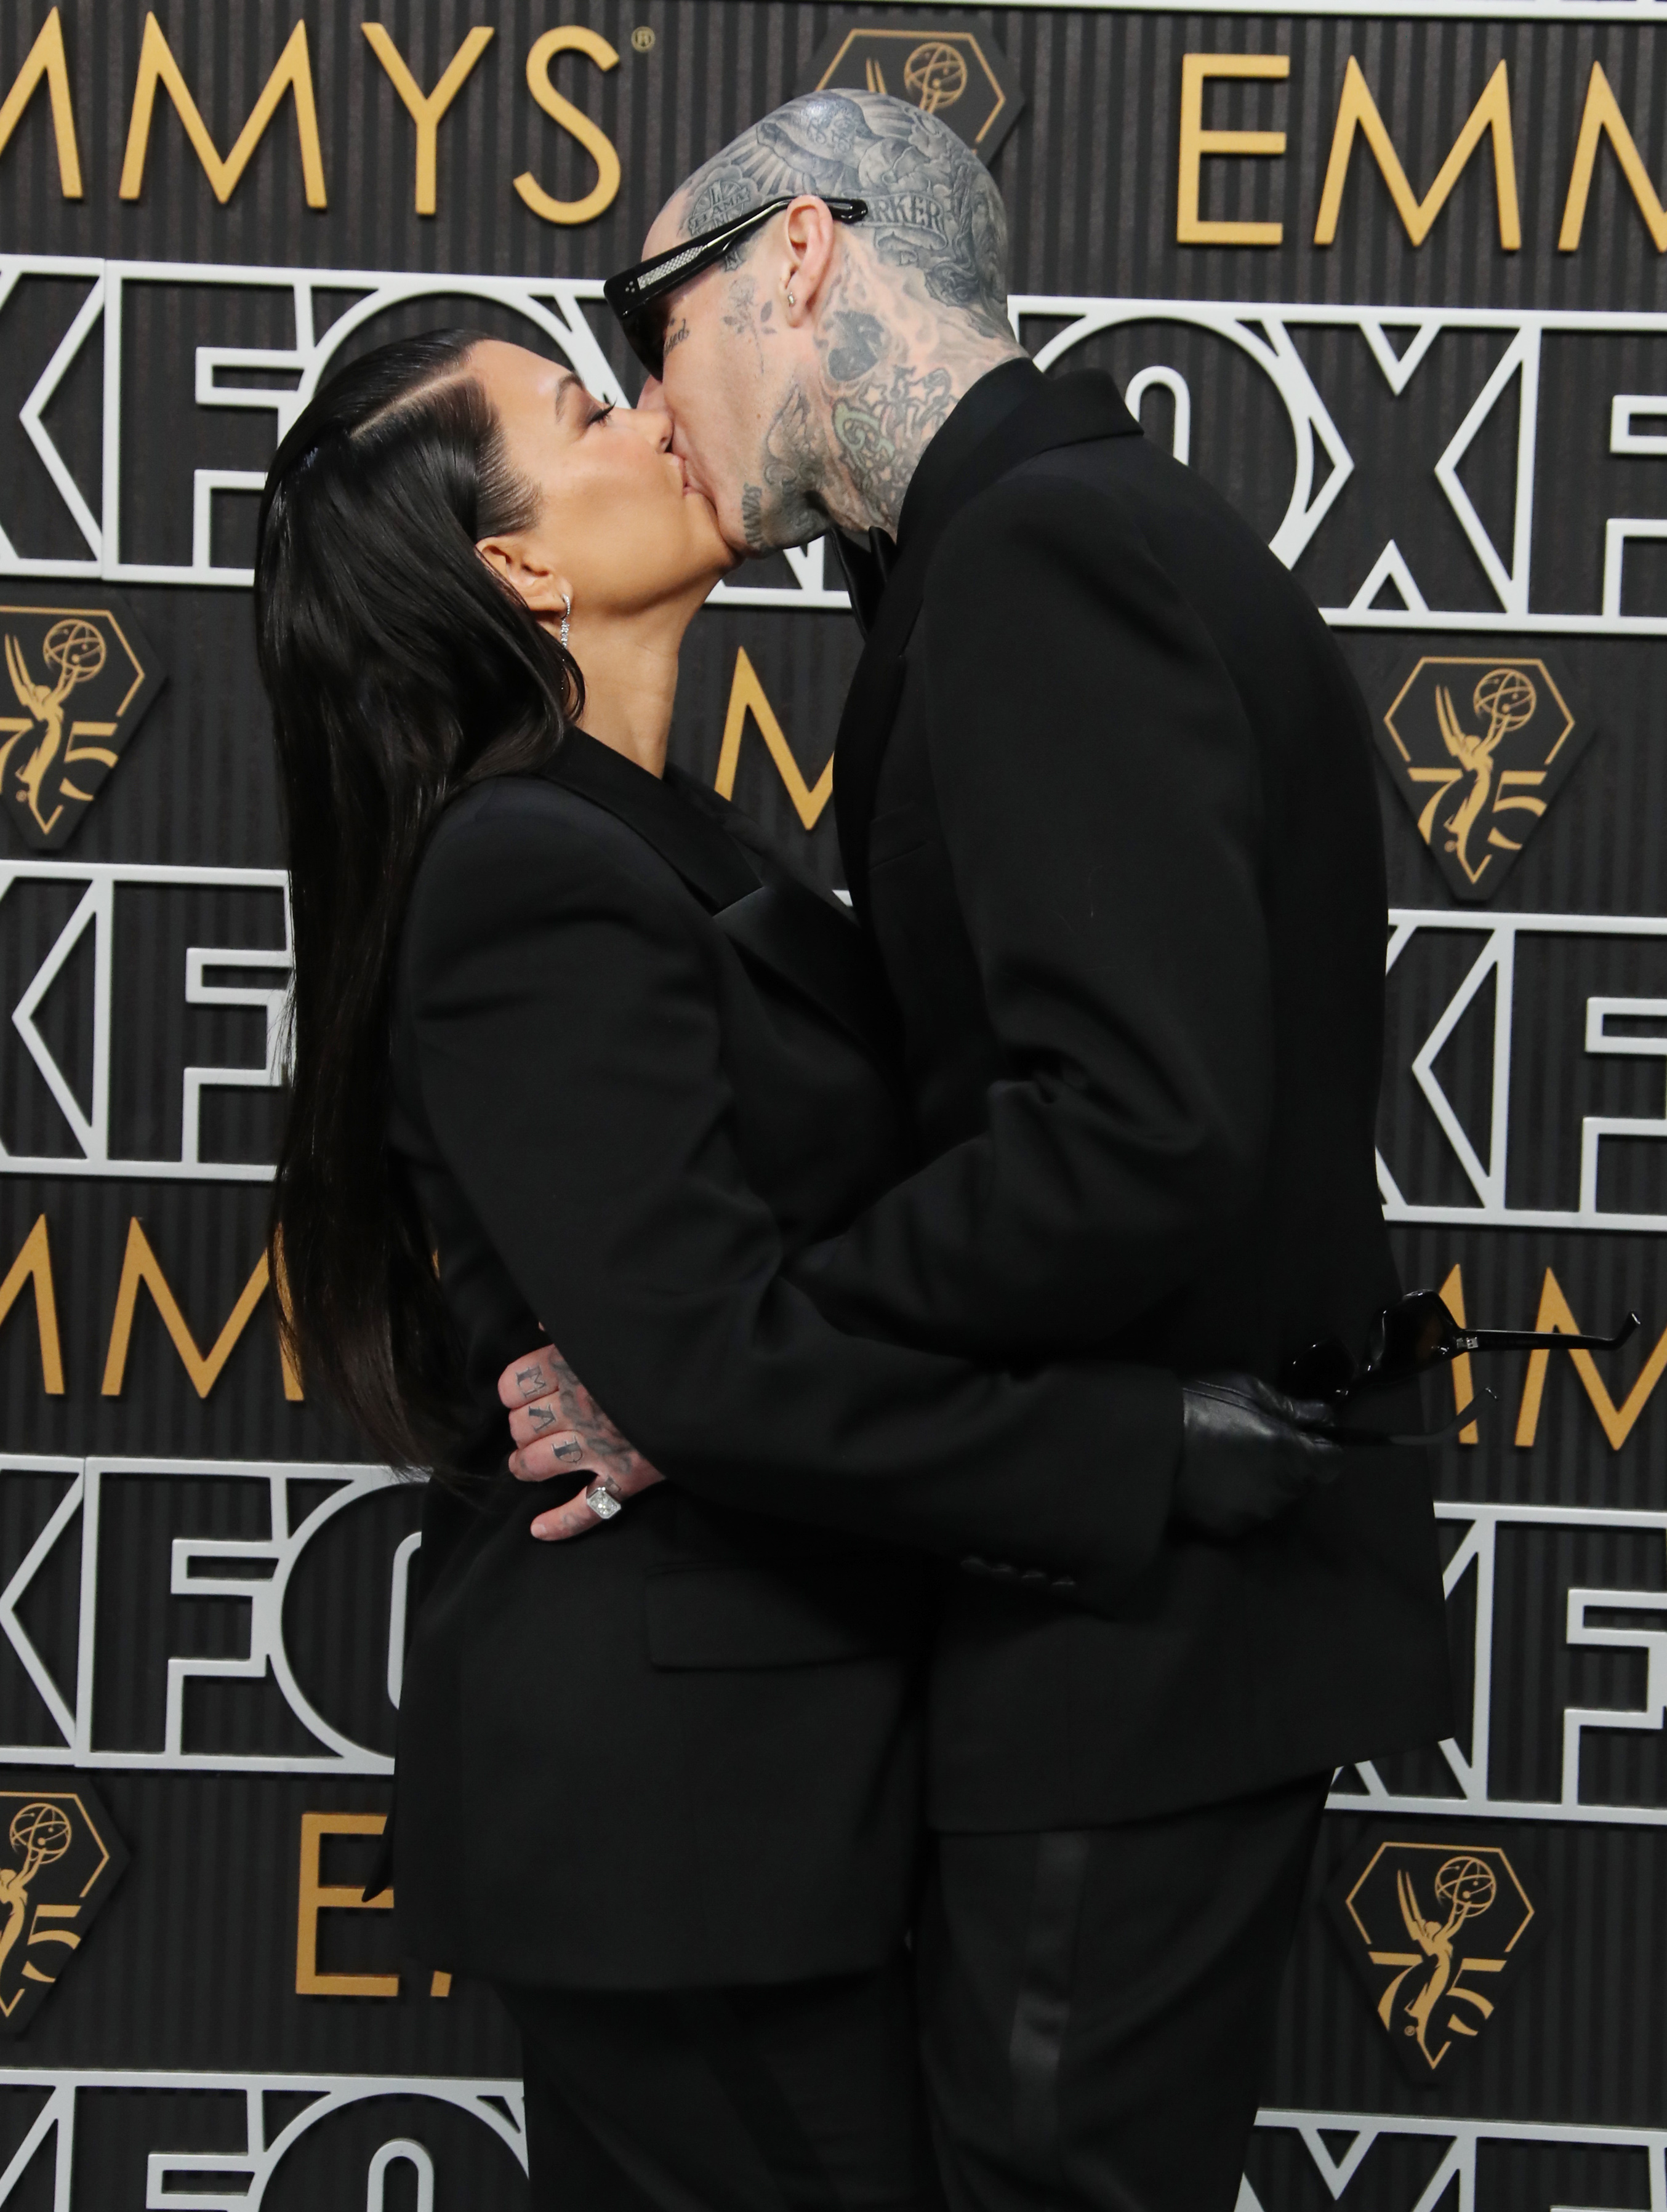 They showed some PDA last month at the Emmys